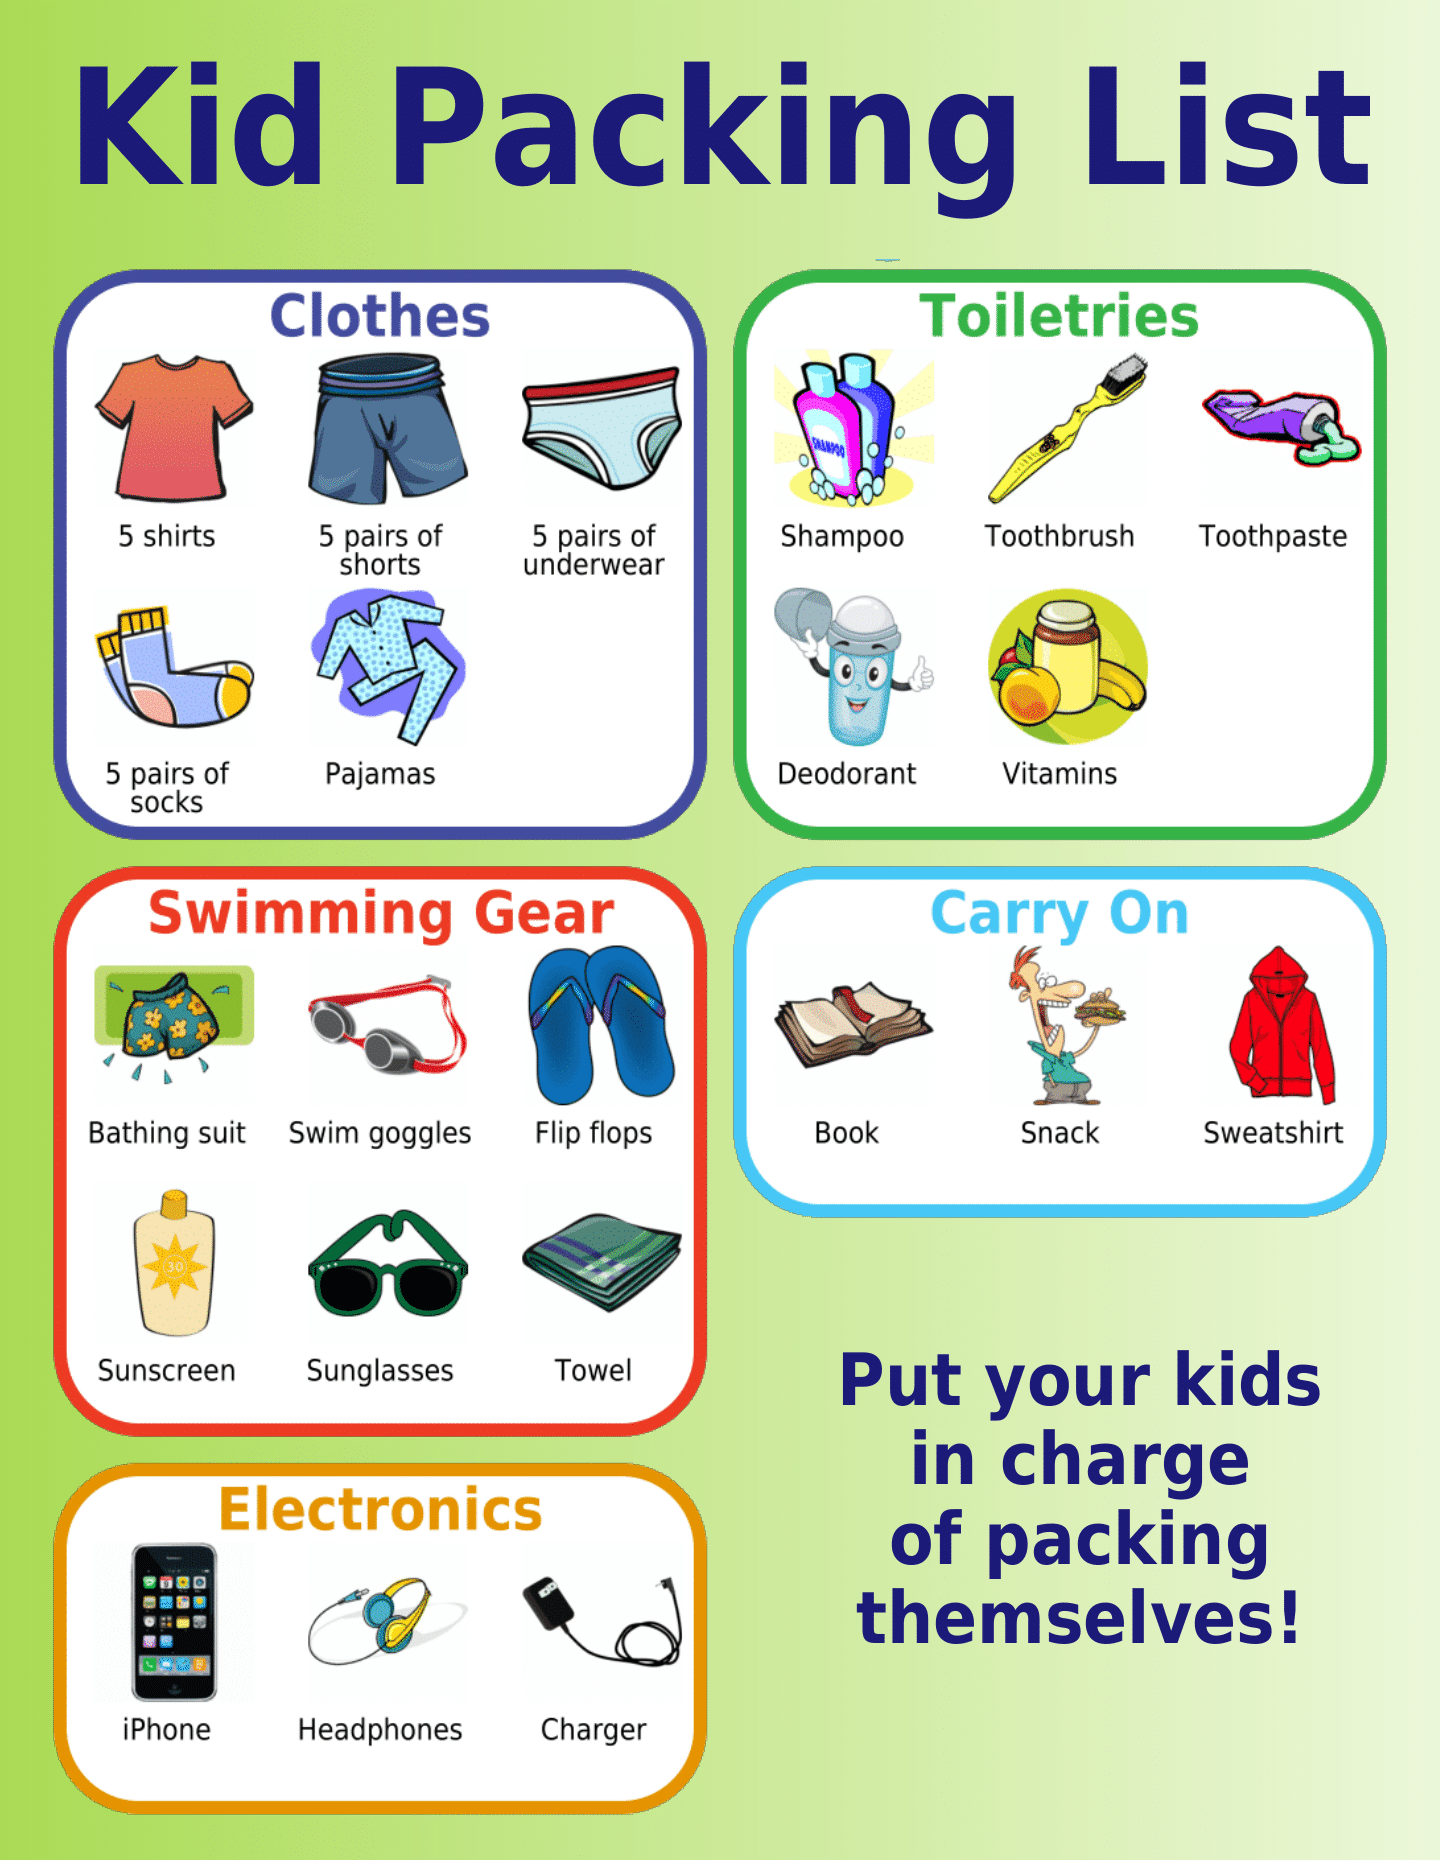 Packing list for kids categorized into clothes, swimming gear, electronics, toiletries, and carry-on